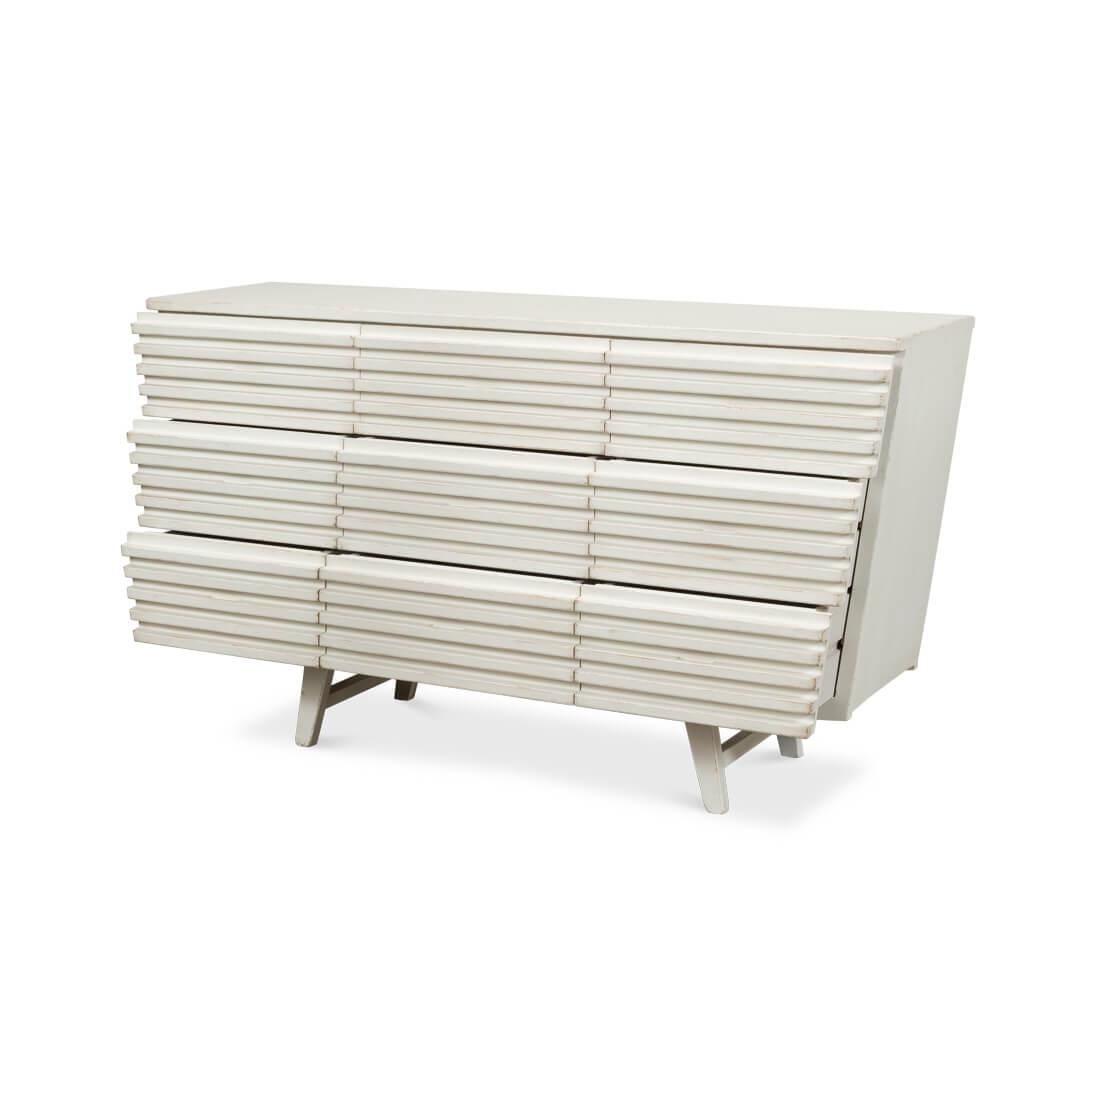 Inspired by Aztec architecture. This piece makes a statement with its ribbed pine facade with a slat design and Antique White finish. This unique geometric piece has nine spacious drawers.

Dimensions: 66